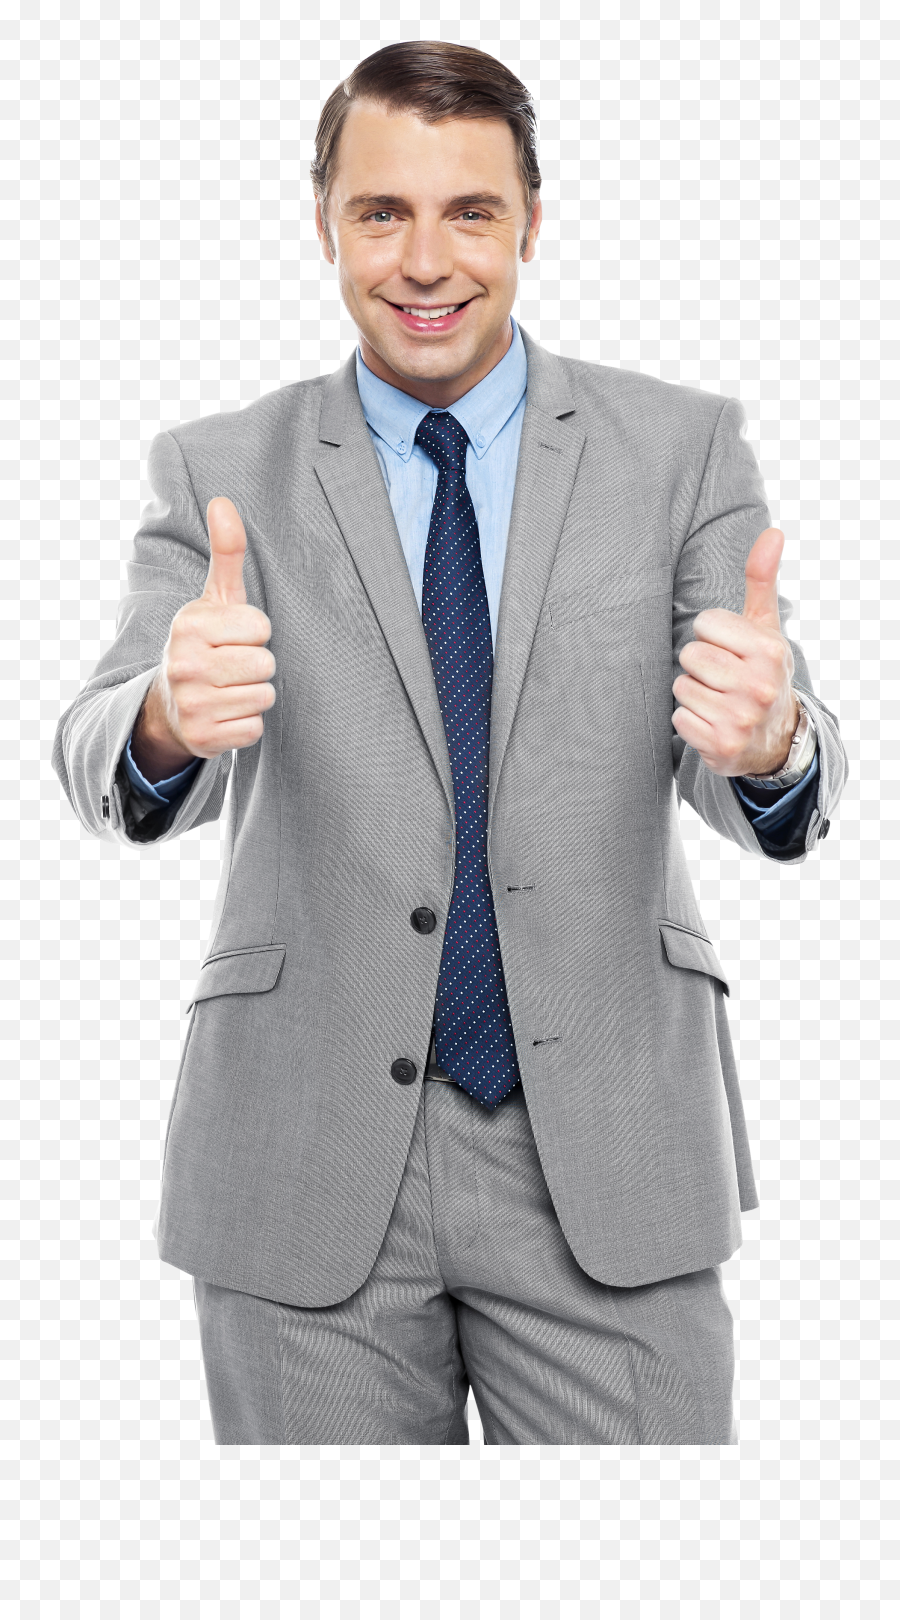 Men Pointing Thumbs Up Png Image For Free Download Man In Suit Transparent